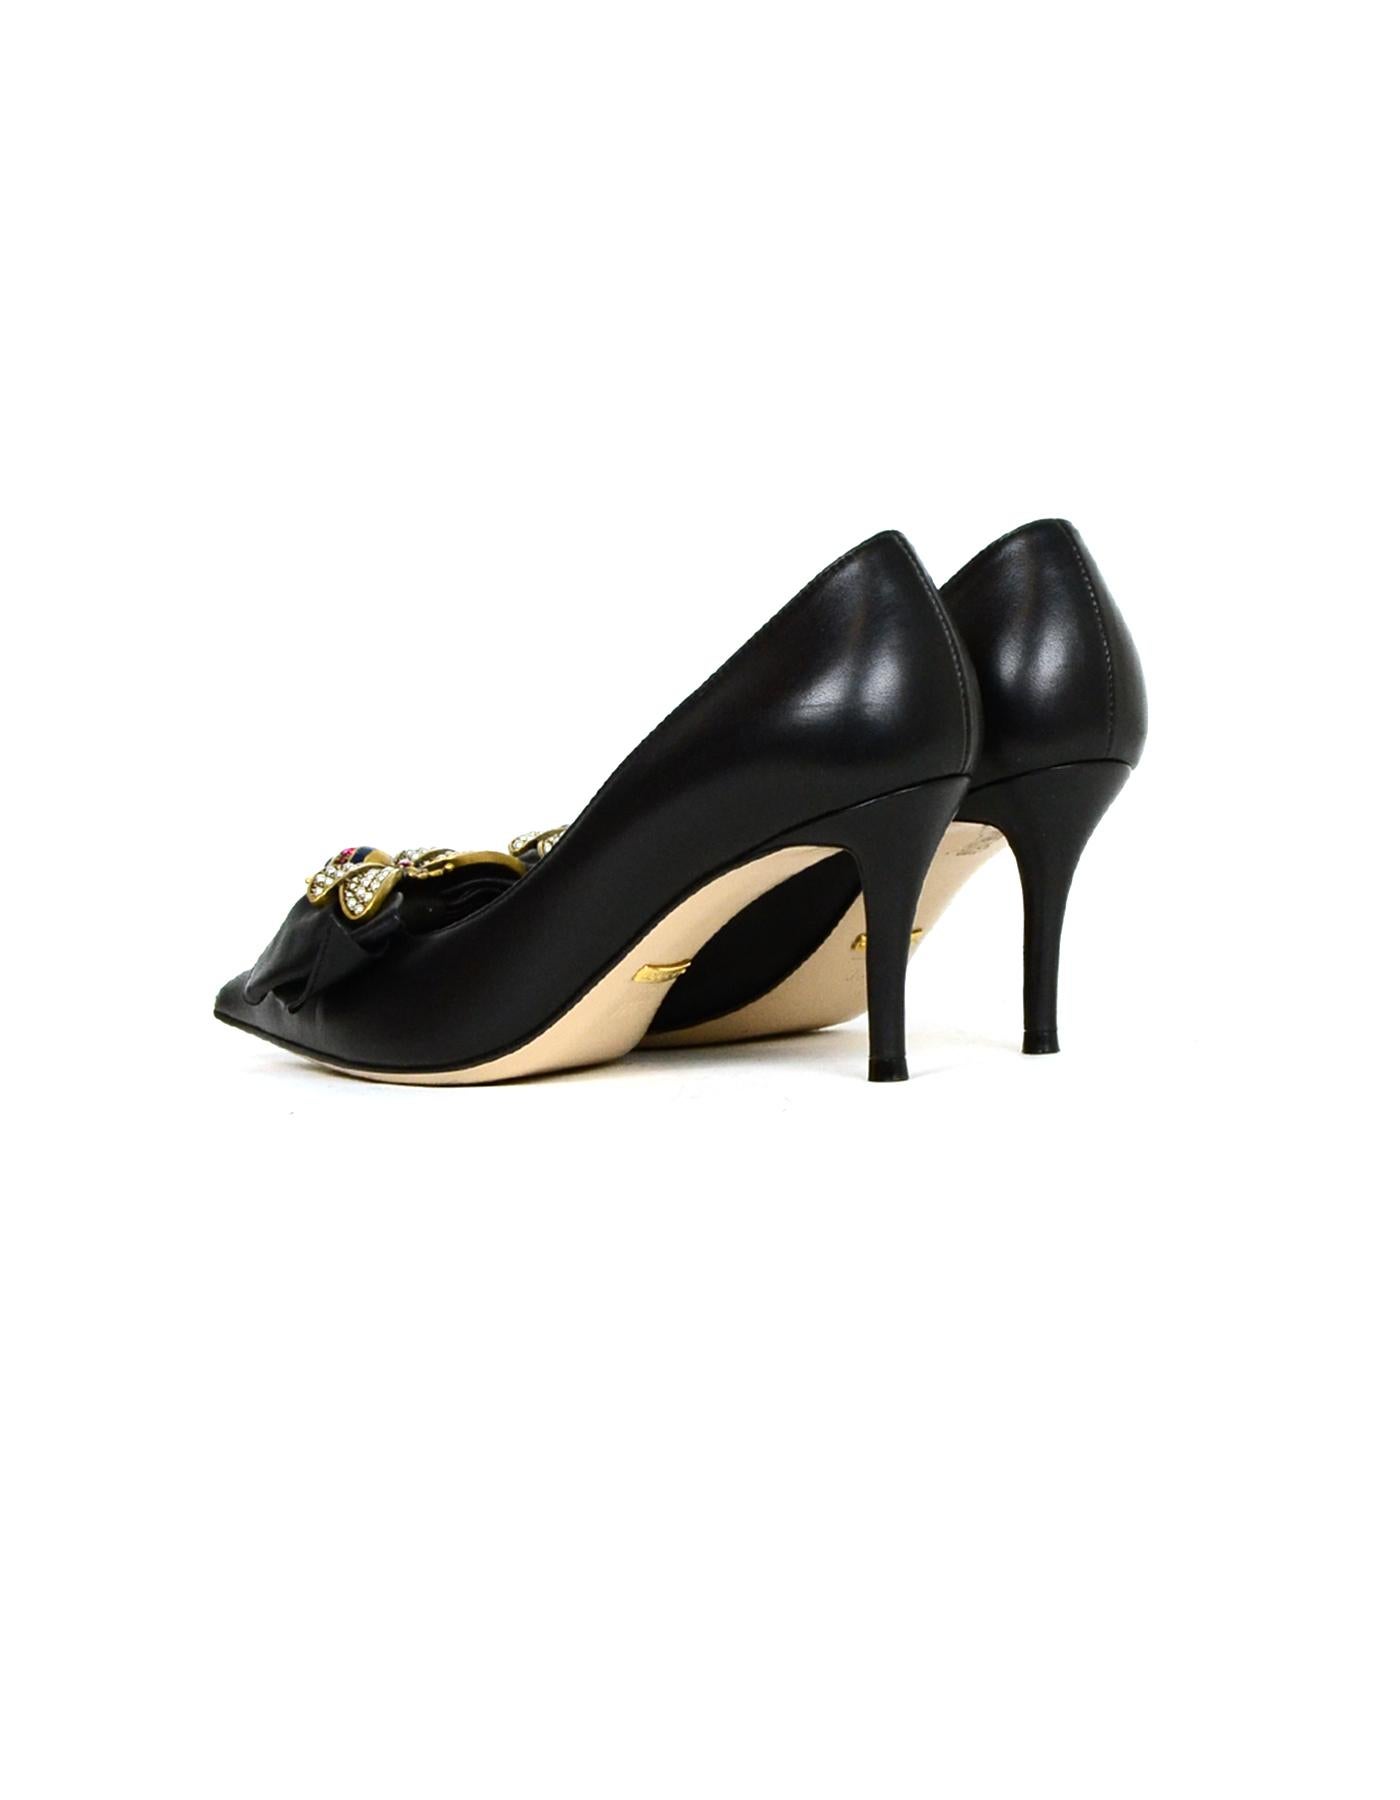 Gucci Queen Margaret Black Leather Pumps with Embellished Bee sz 36.5 ...